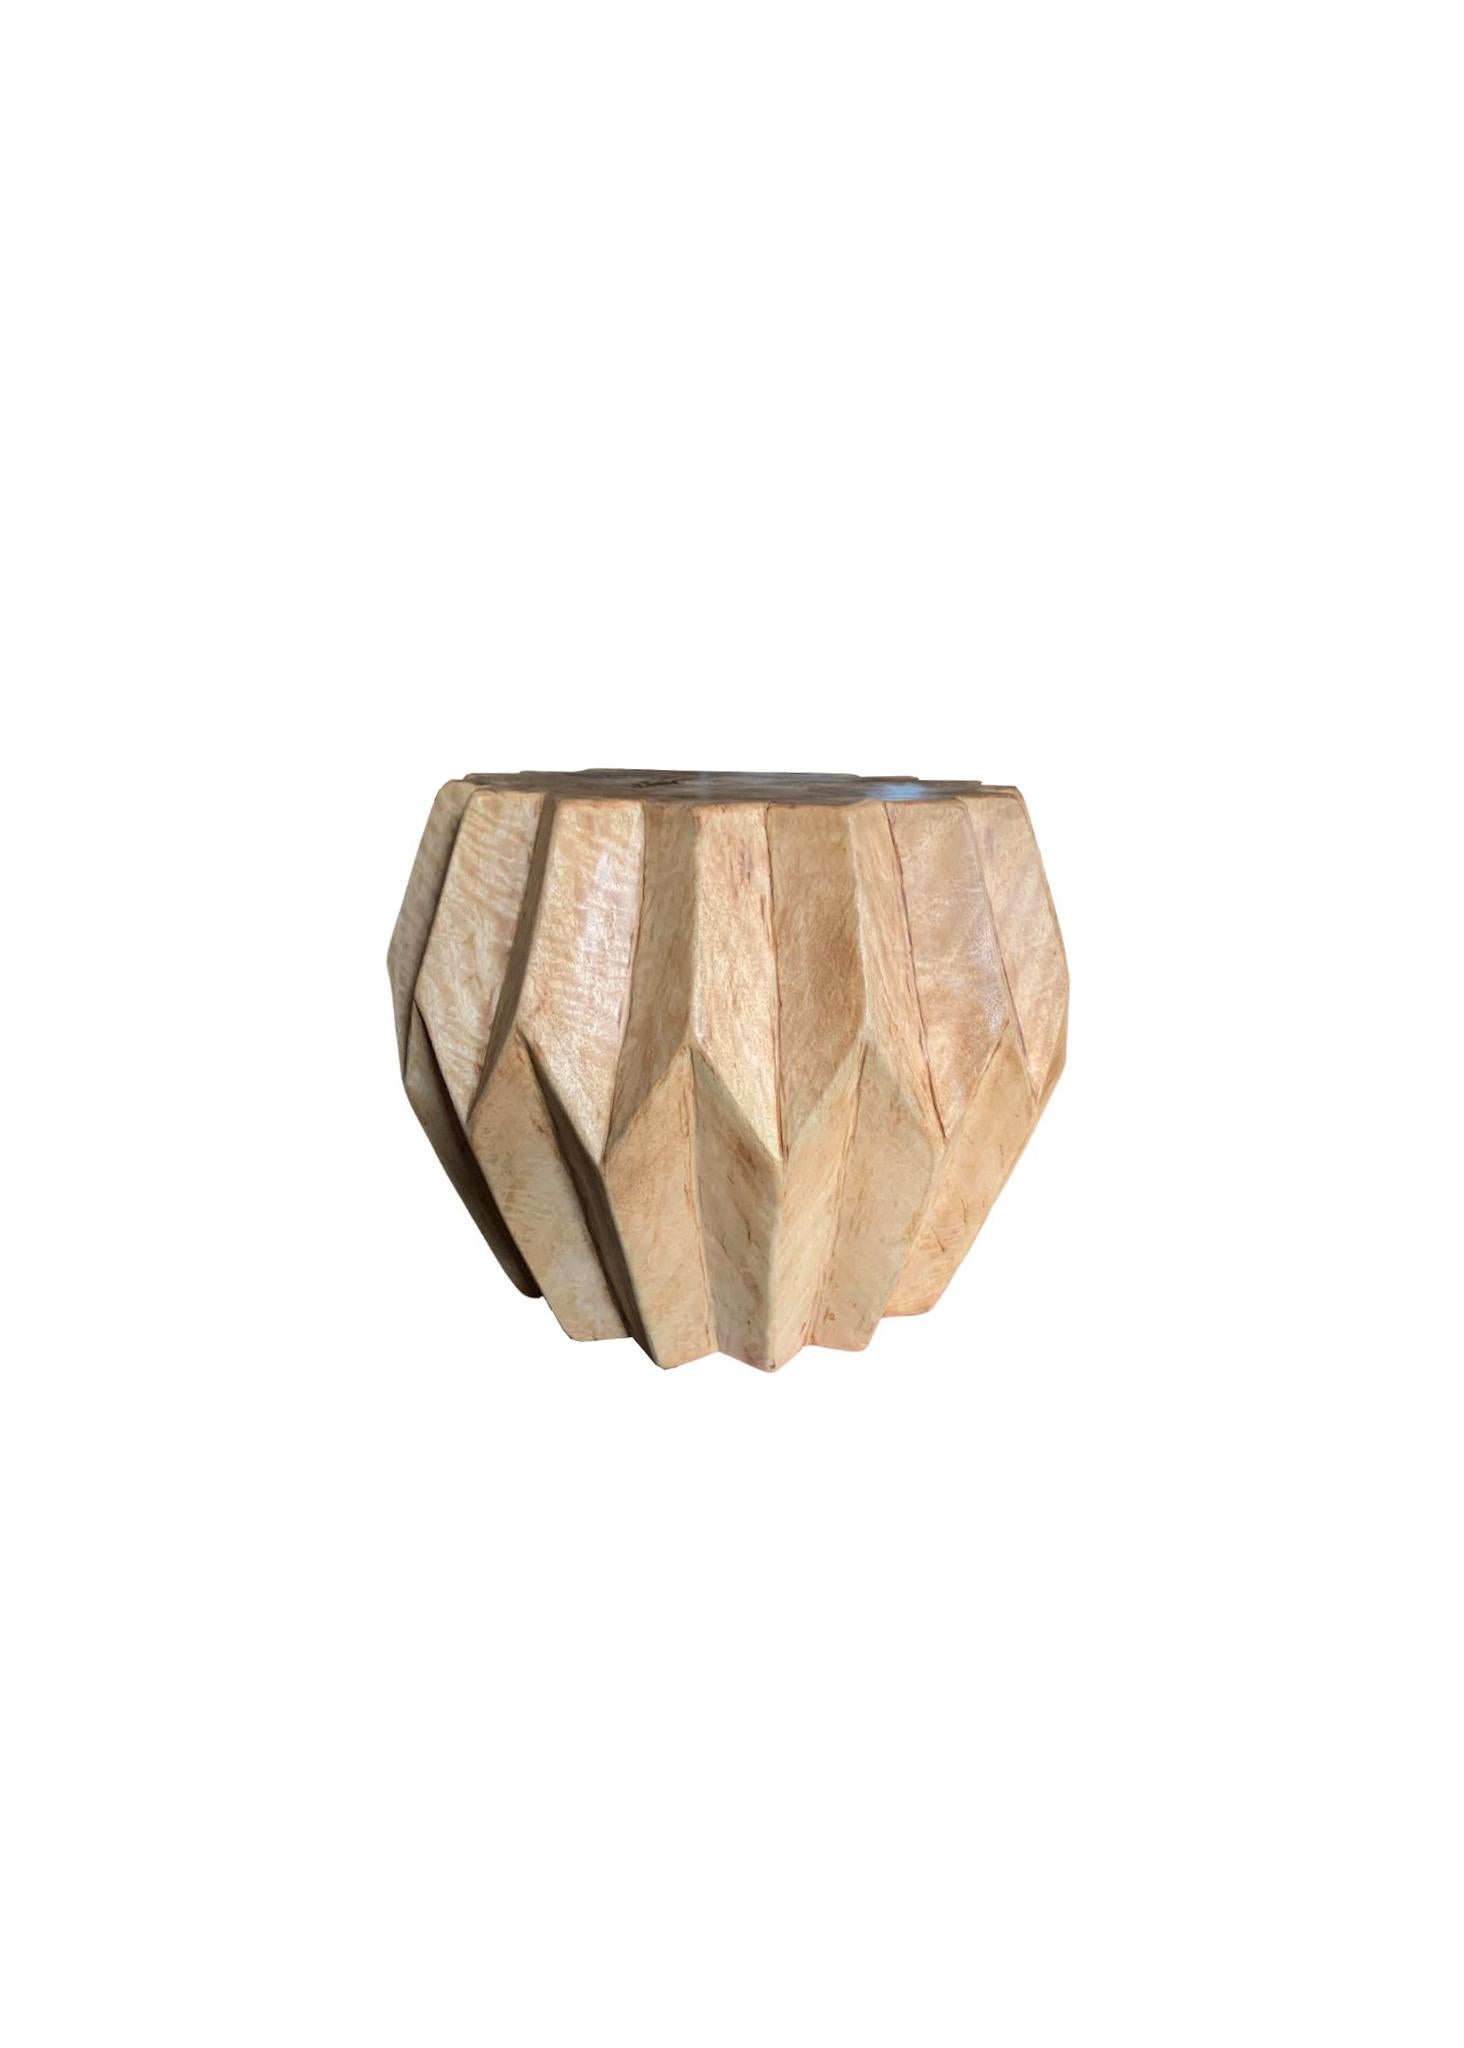 A wonderfully sculptural round side table. Its neutral pigment and subtle wood texture makes it perfect for any space. A uniquely sculptural and versatile piece. This table was crafted from mango wood and was crafted to resemble a work of origami.